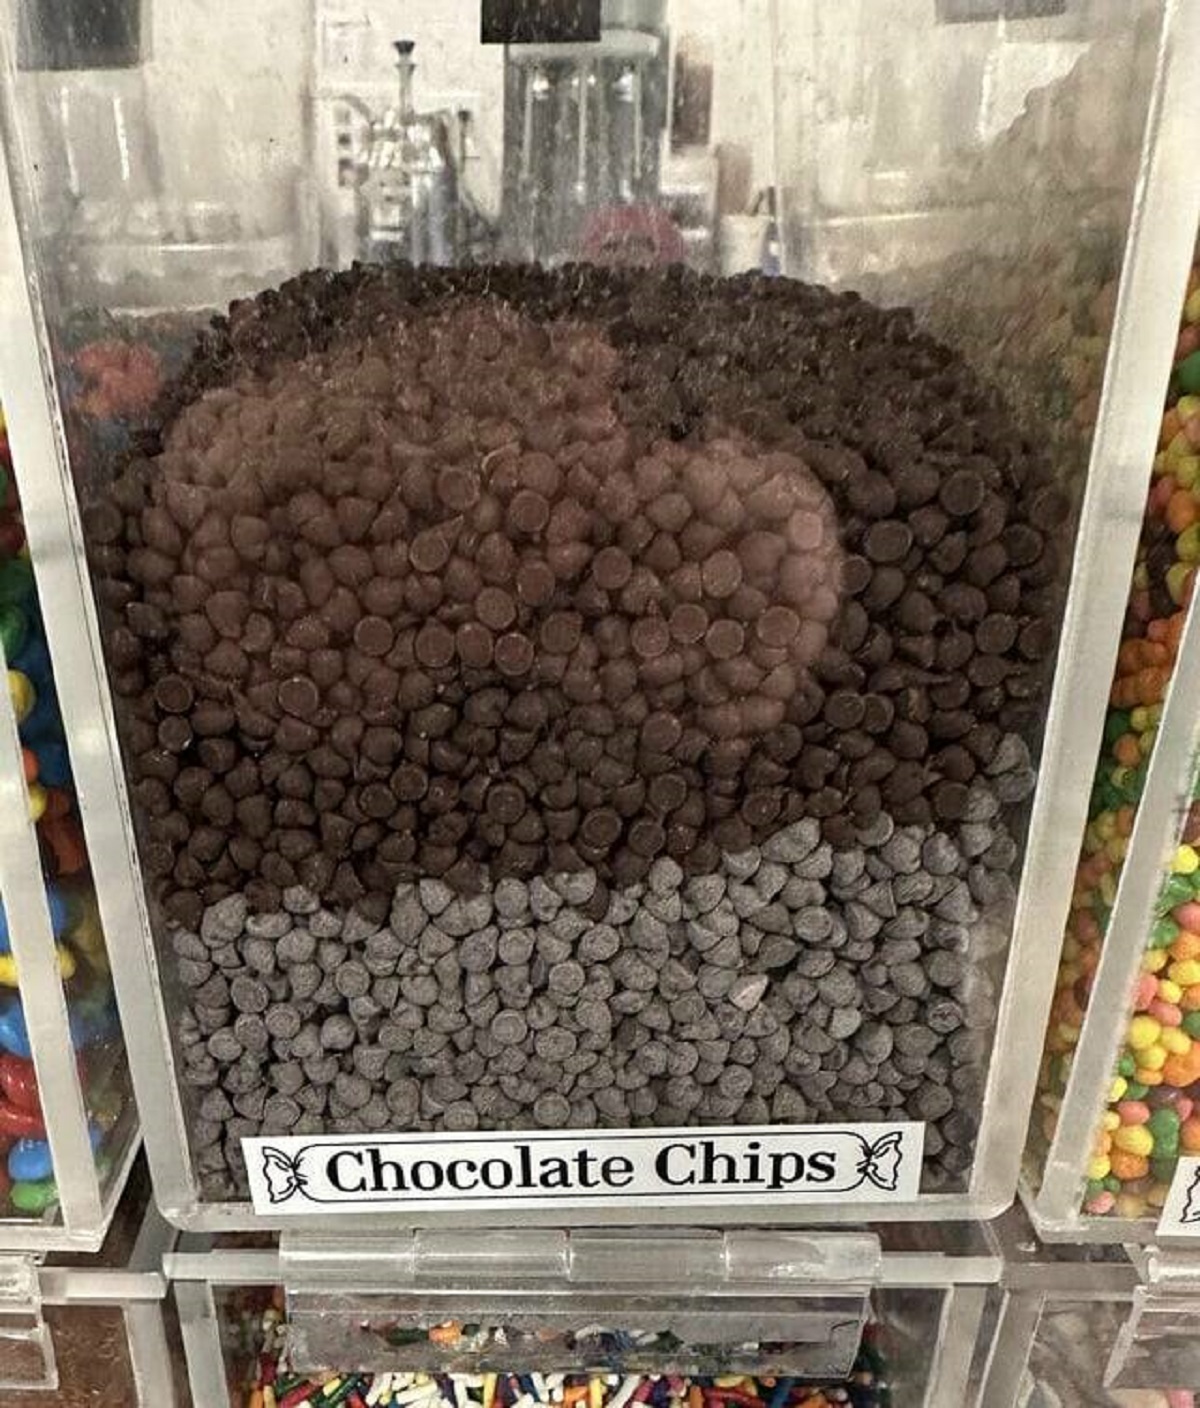 "Old vs new chocolate chips"